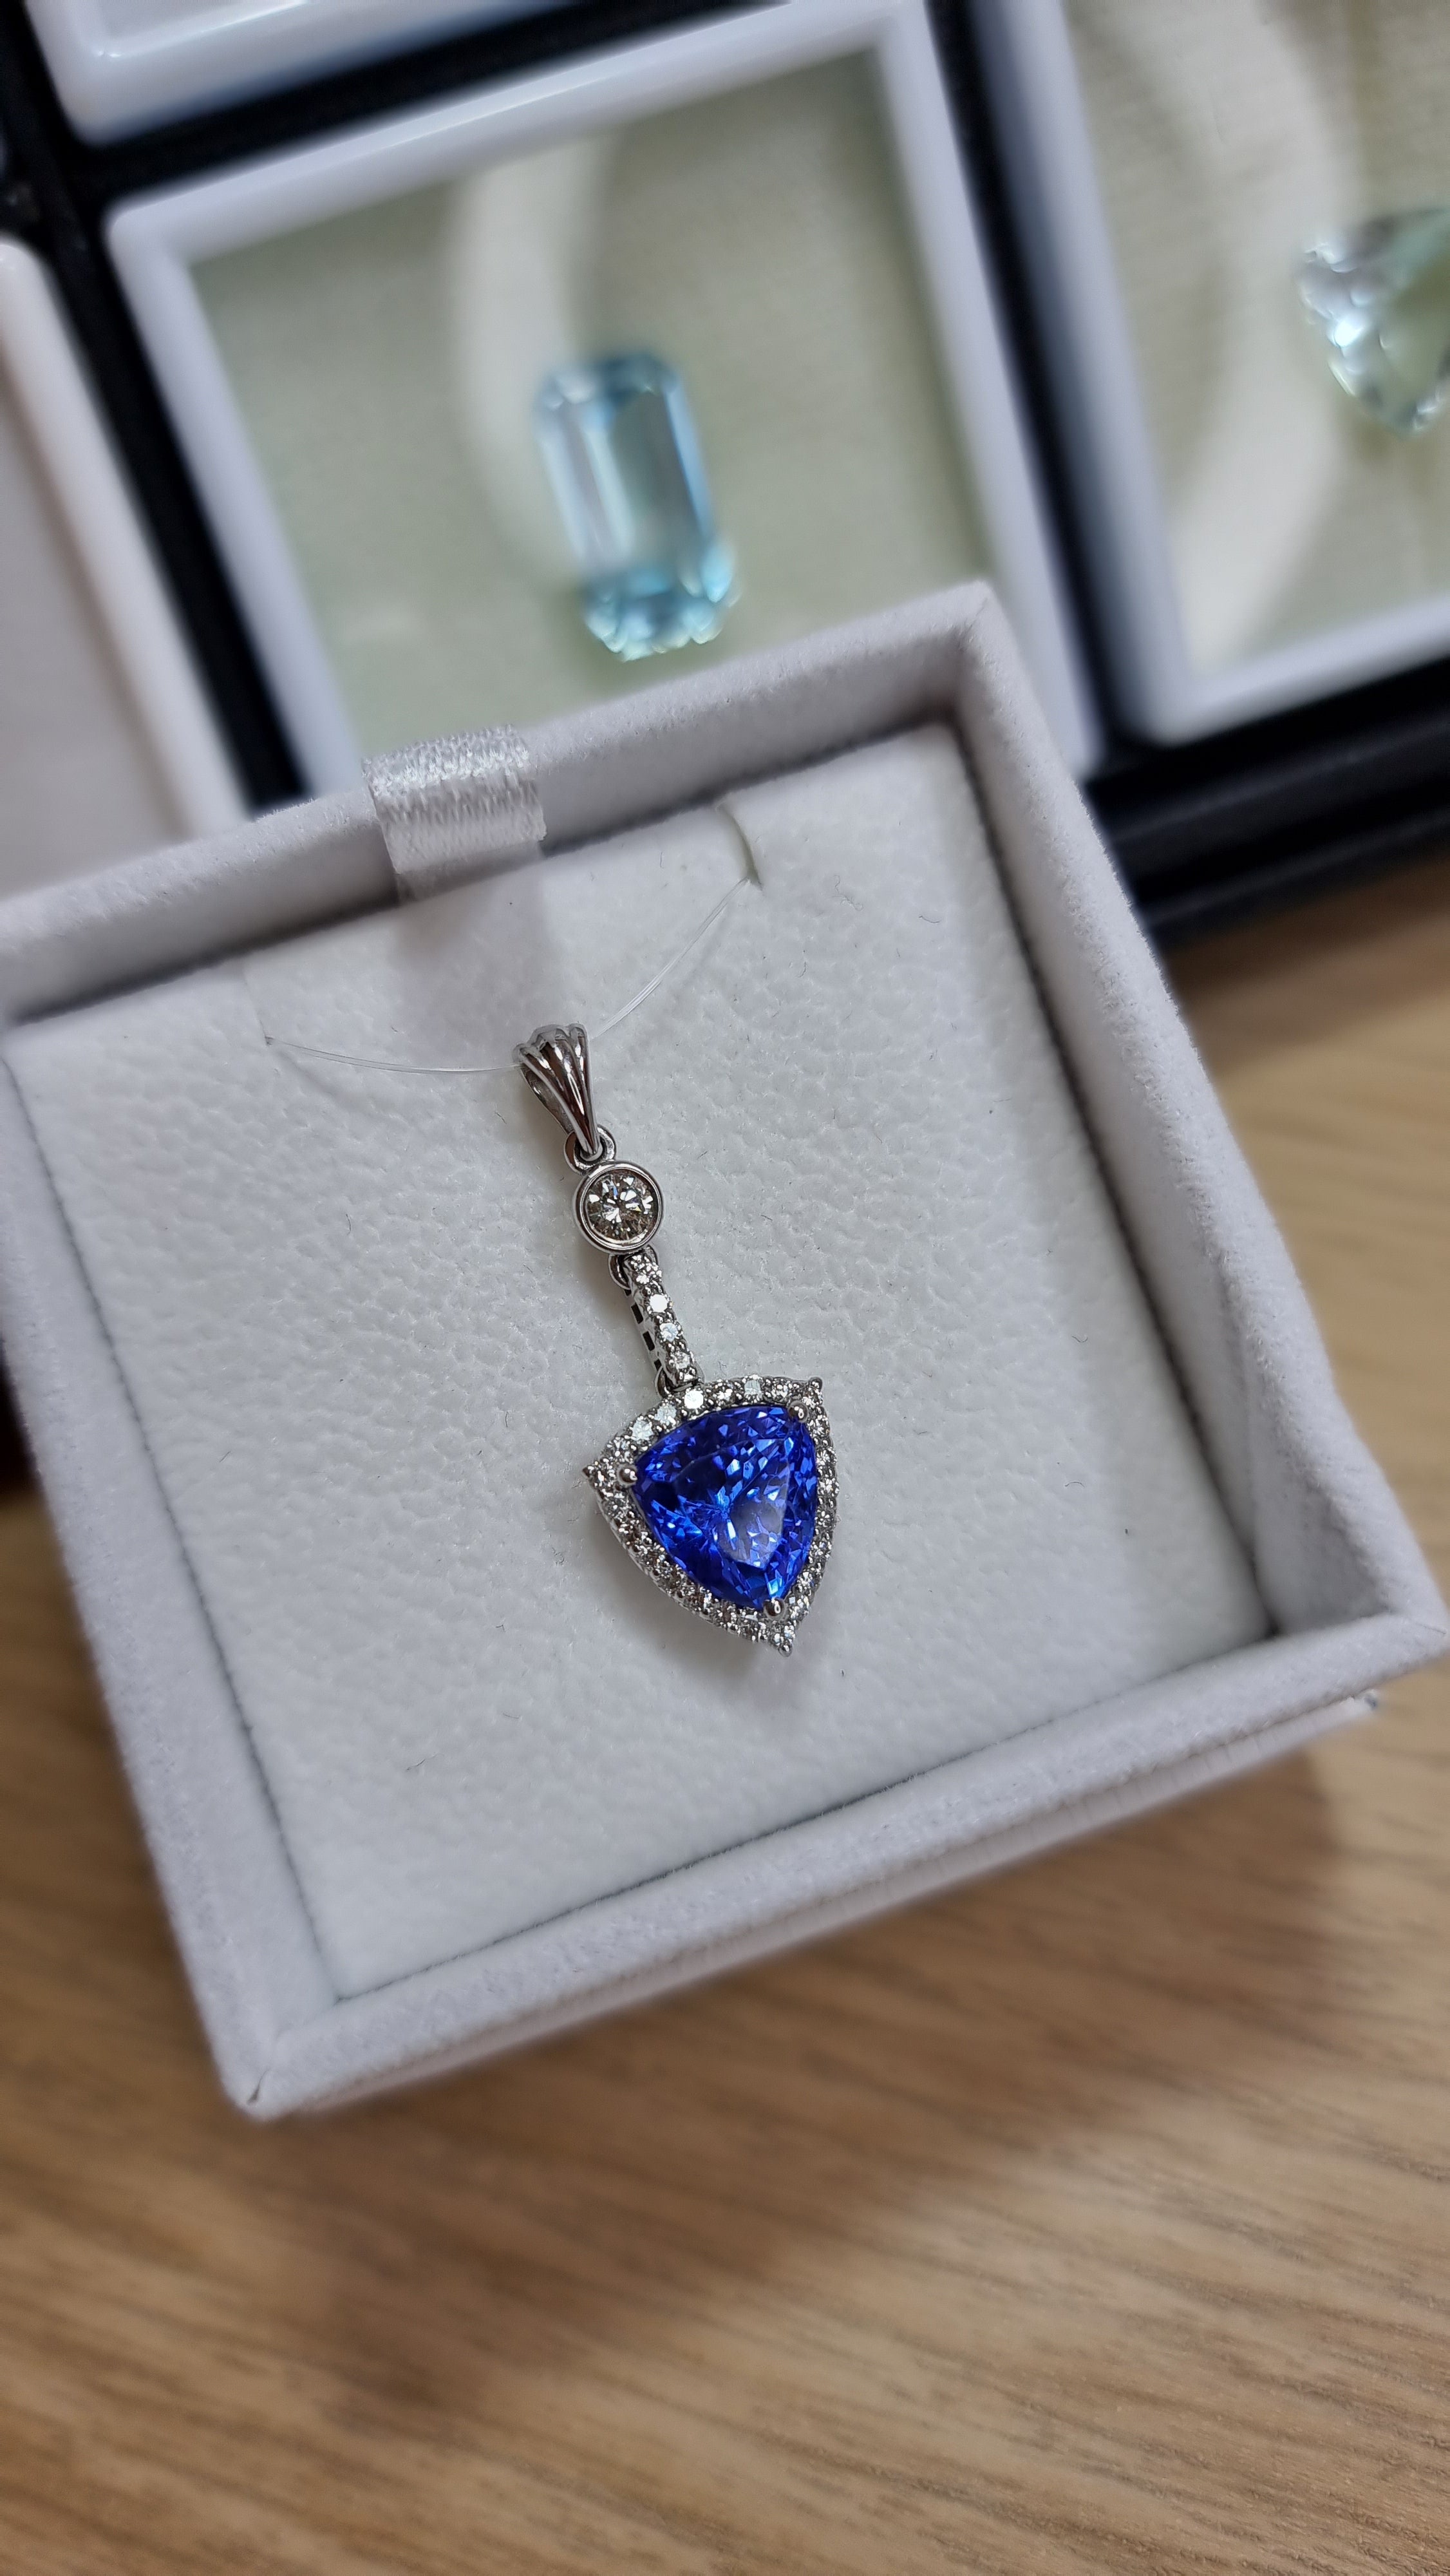 Stunning natural Tanzanite with vivid blue hue. Tanzanite is an incredibly rare gemstone currently only mined in one location in the world, Arusha in Tanzania. The blue Tanzanite is perfectly set in a stunning cluster halo of natural diamonds and